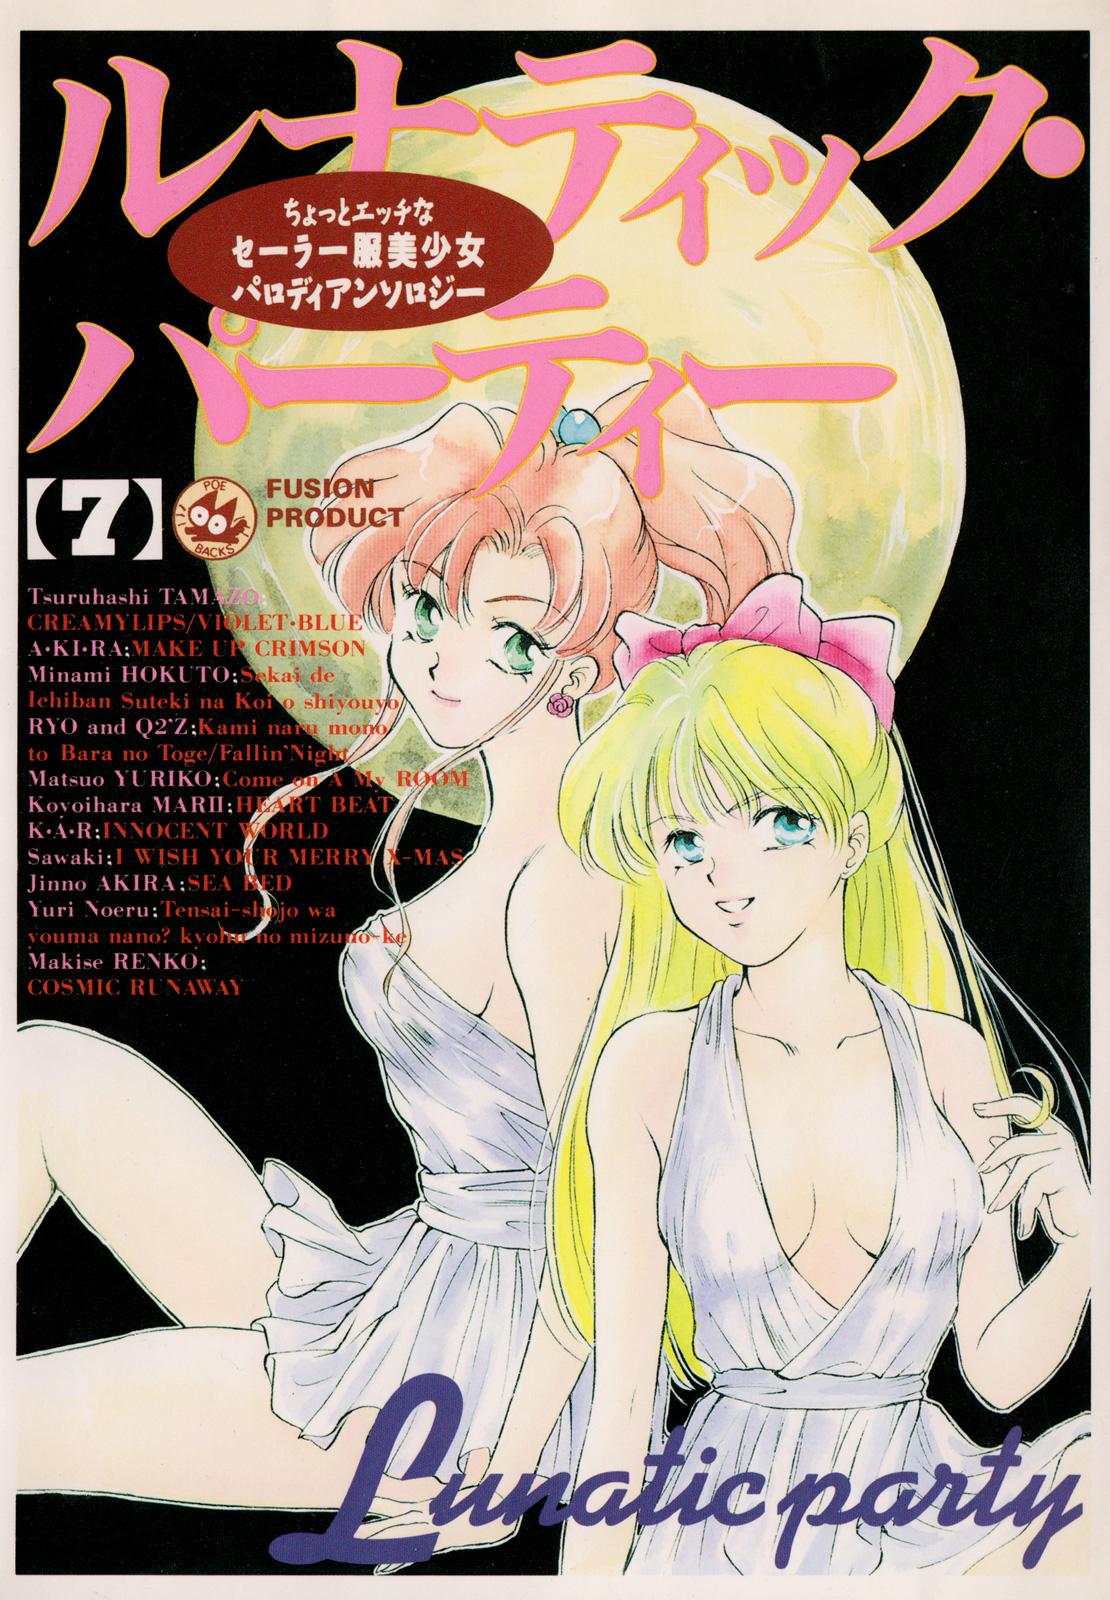 Cheating Lunatic Party 7 - Sailor moon Wetpussy - Picture 1